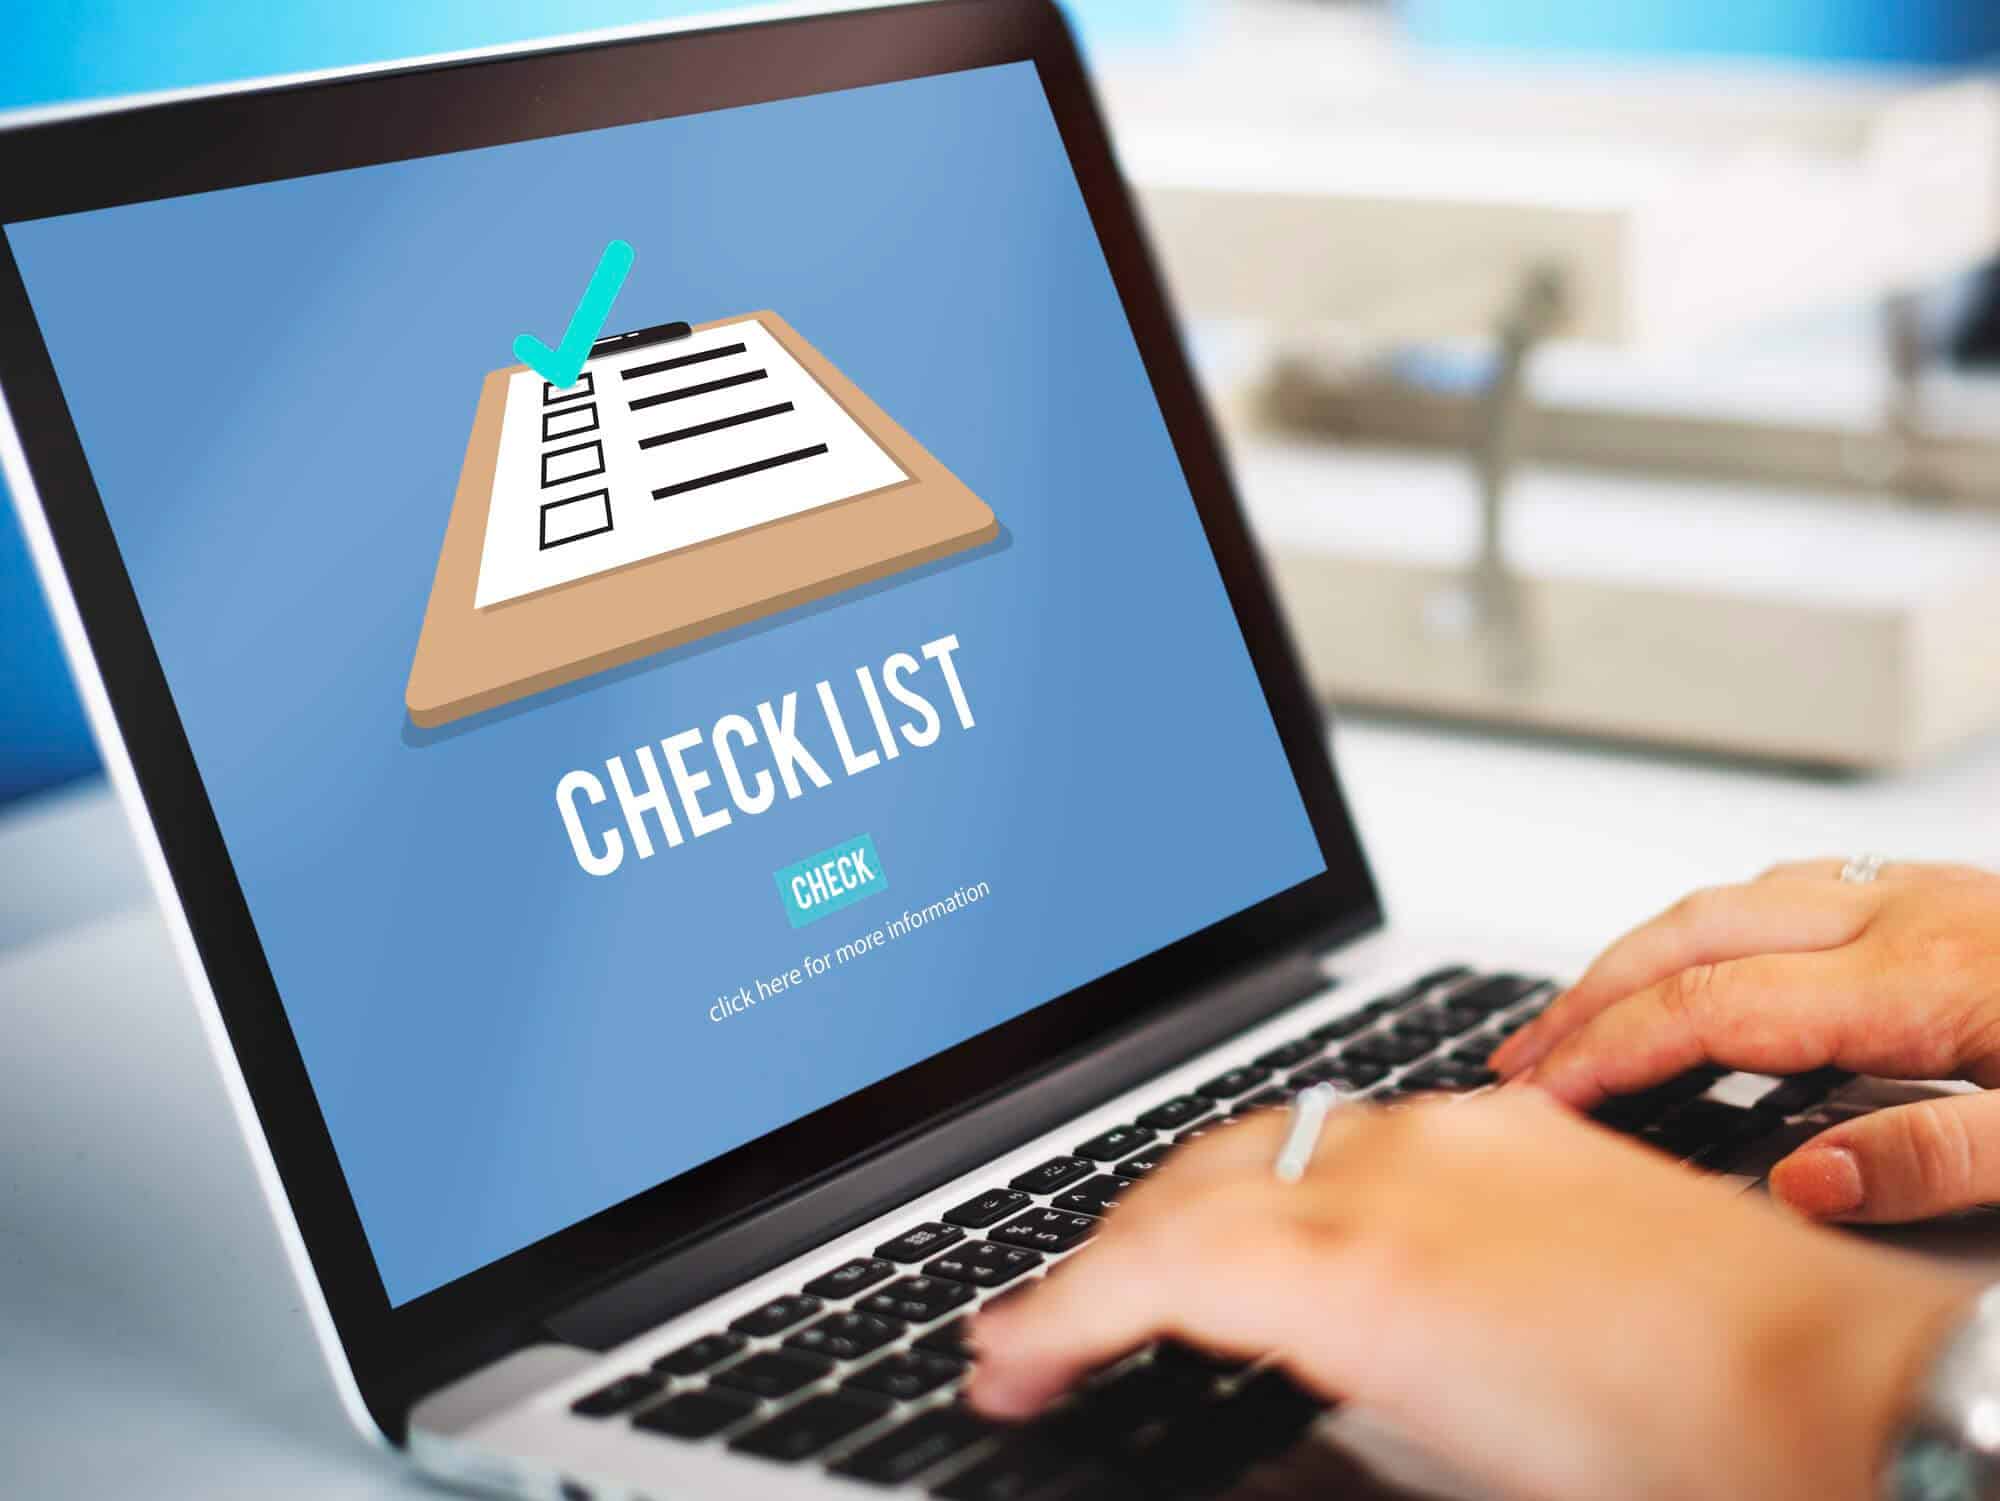 checklist on the laptop